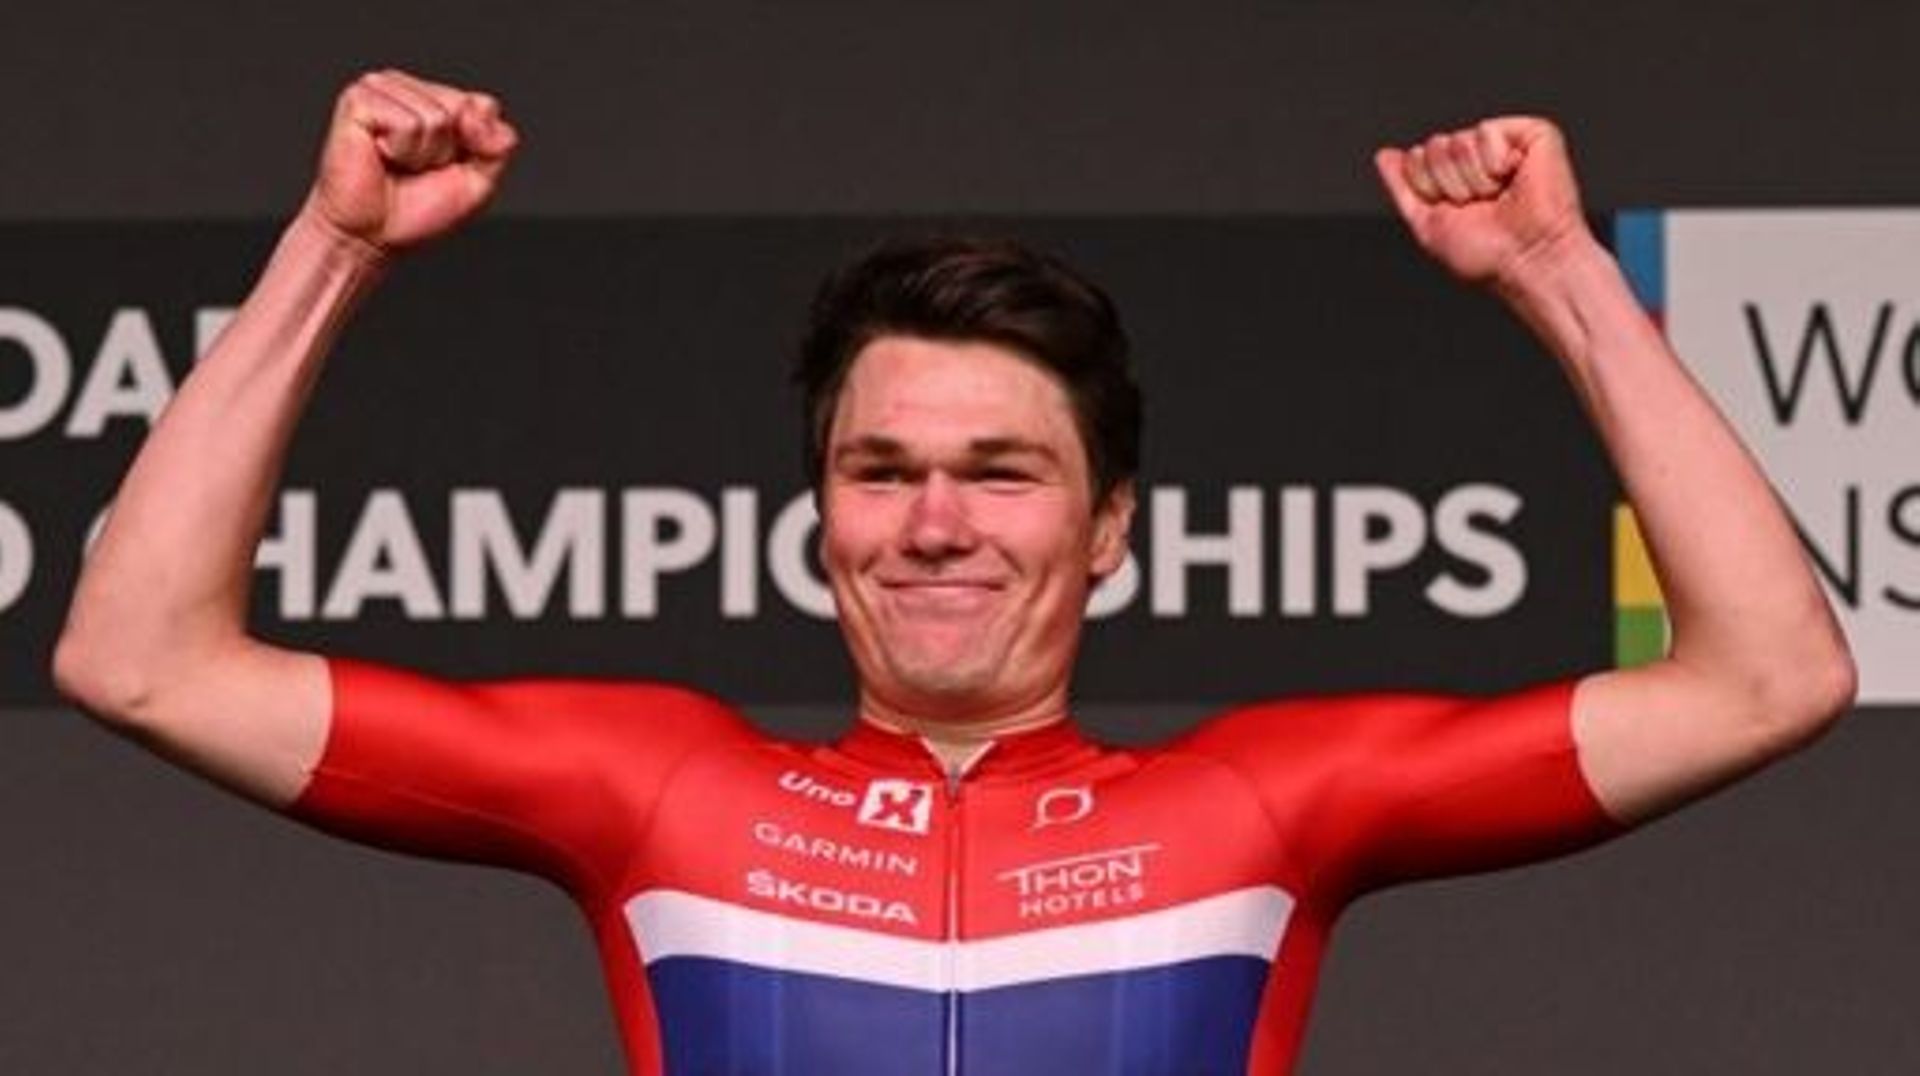 Norway’s Soren Waerenskjold celebrates on the podium after winning the men’s under-23 individual time trial cycling event at the UCI 2022 Road World Championship in Wollongong on September 19, 2022. WILLIAM WEST / AFP